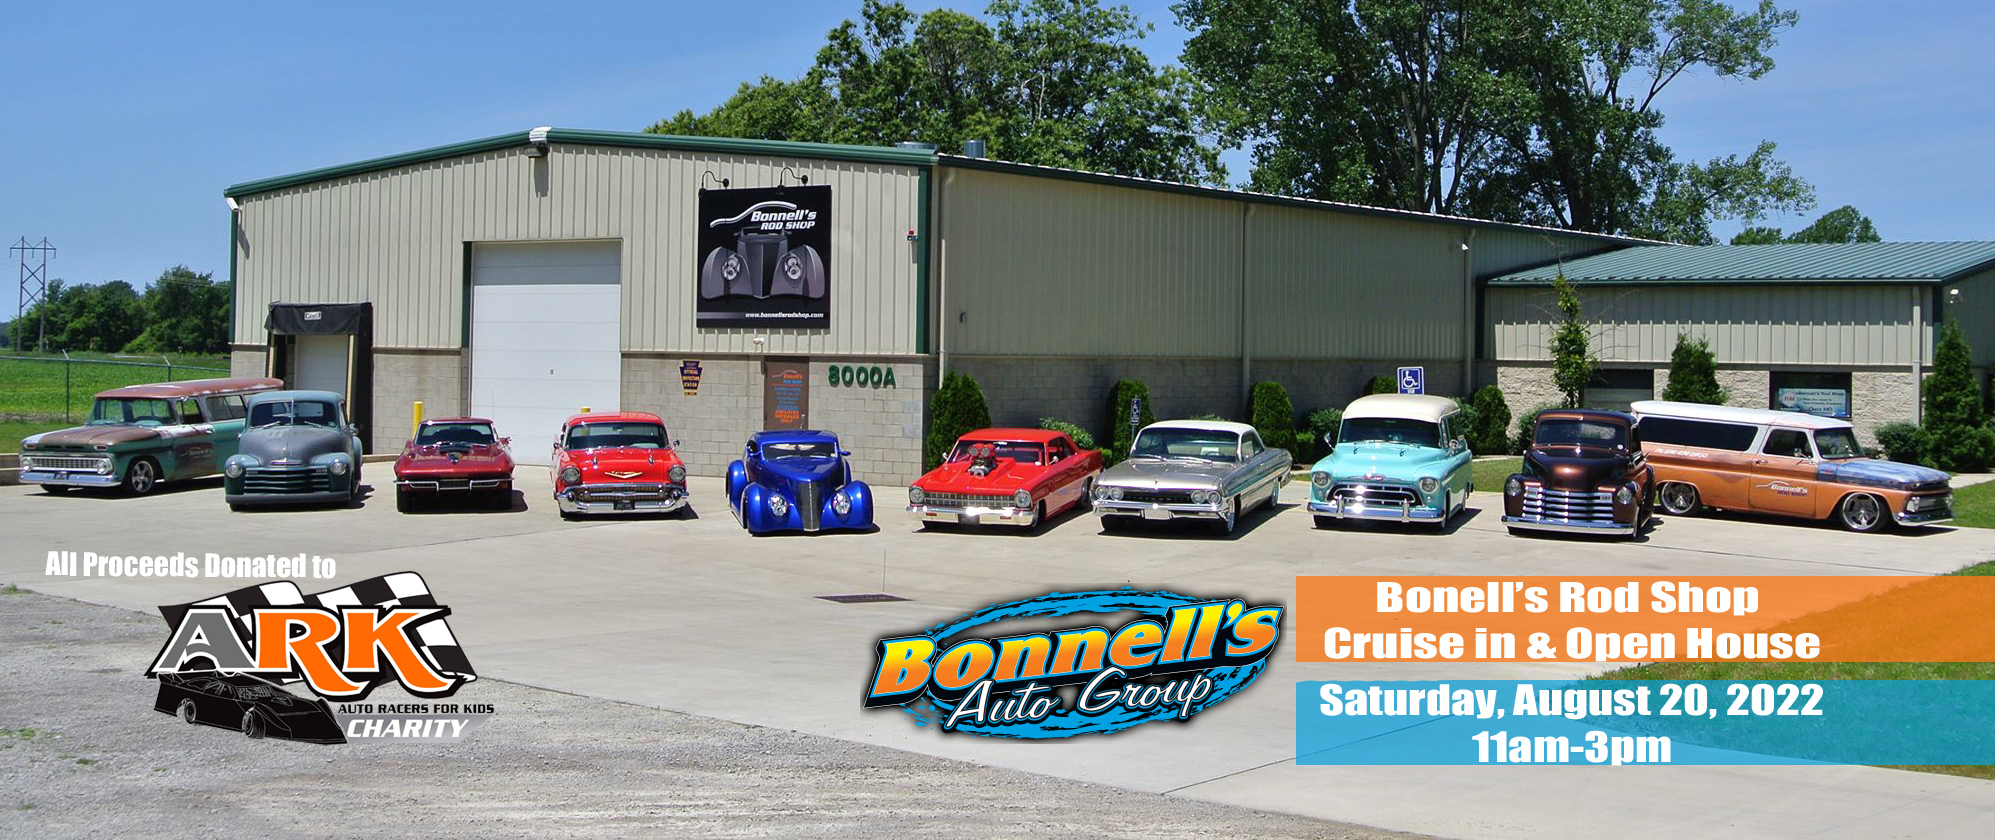 BONNELL'S ROD SHOP Cruise In & Open House